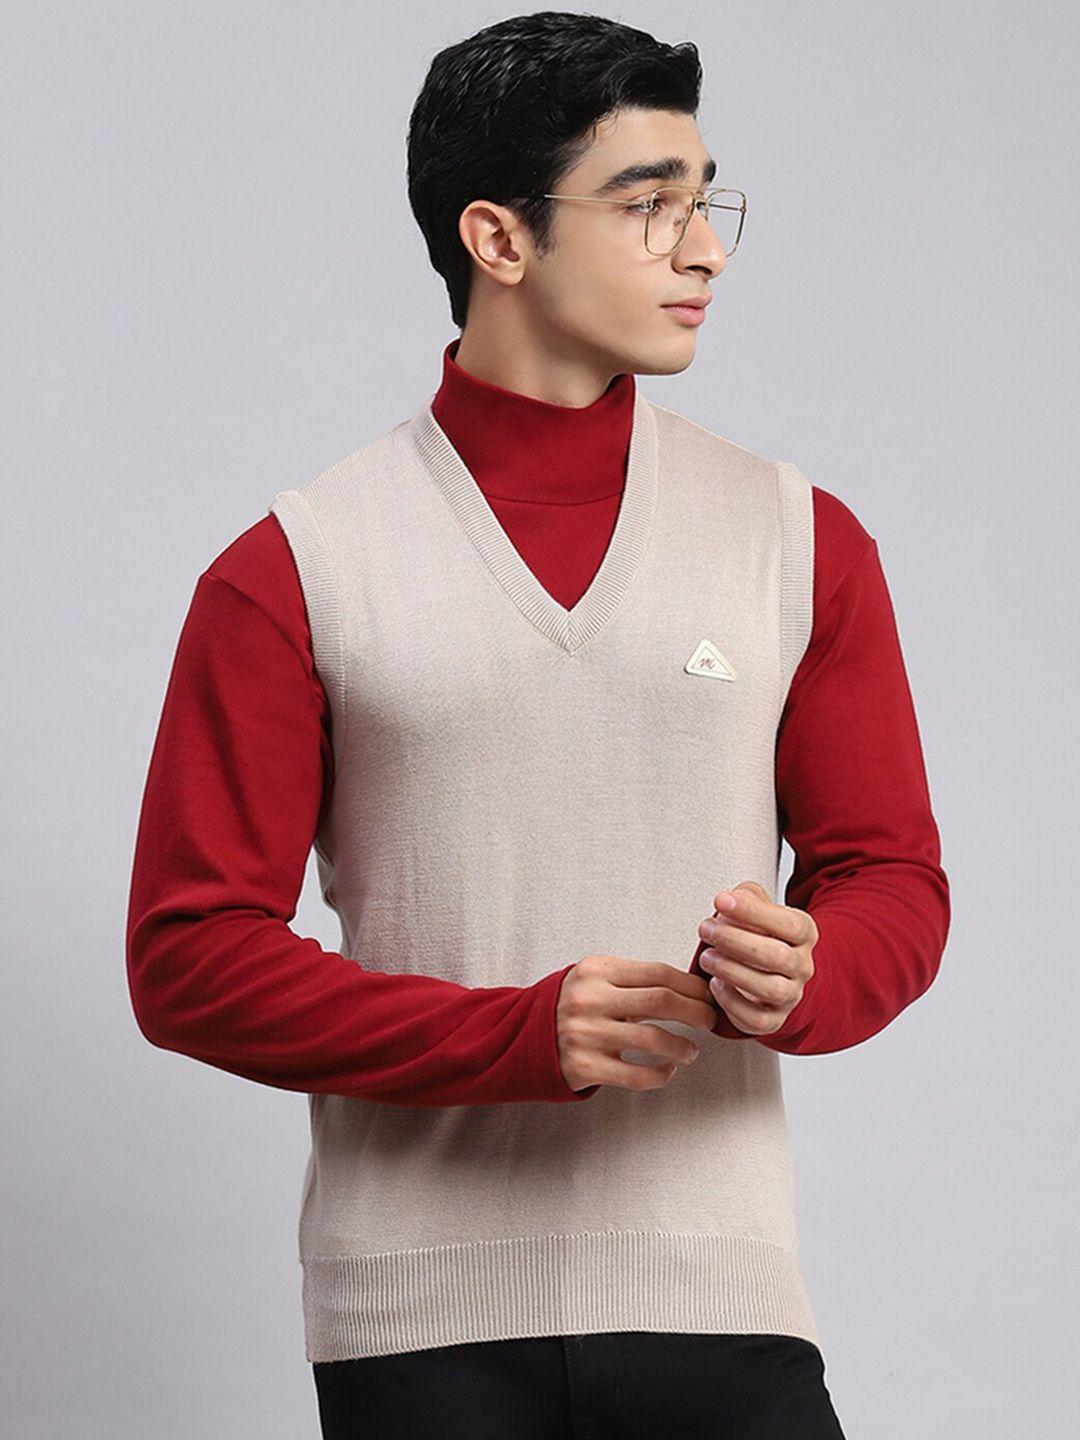 monte carlo v- neck ribbed pure woollen sweater vest